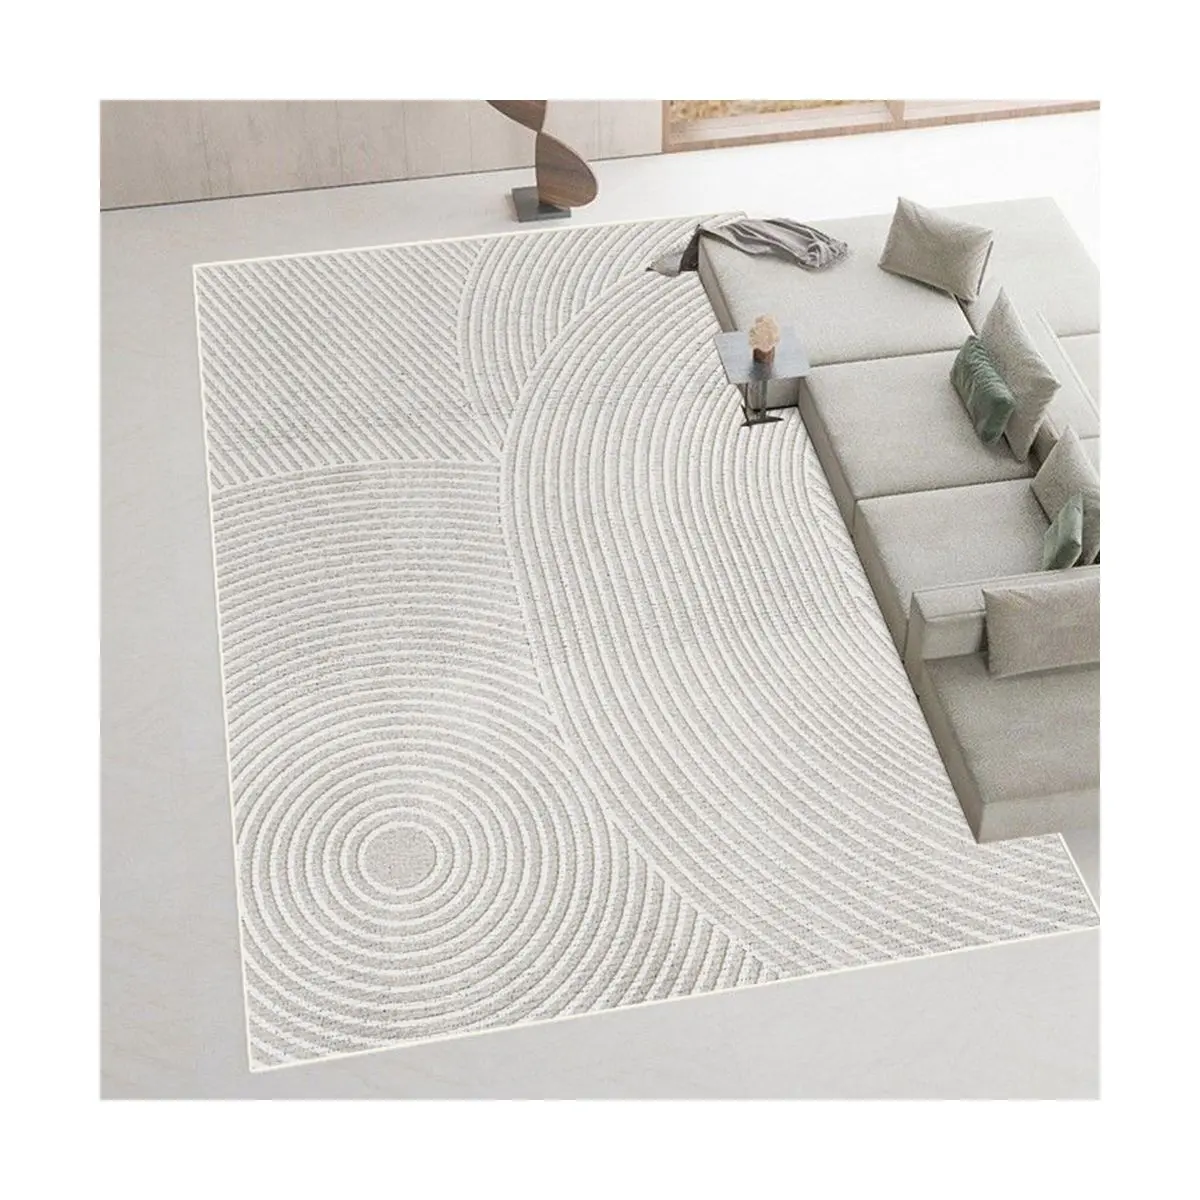 Geometric Modern Area Rugs Bedroom Washable Area Carpets Fine Chenille Rugs for Living Room